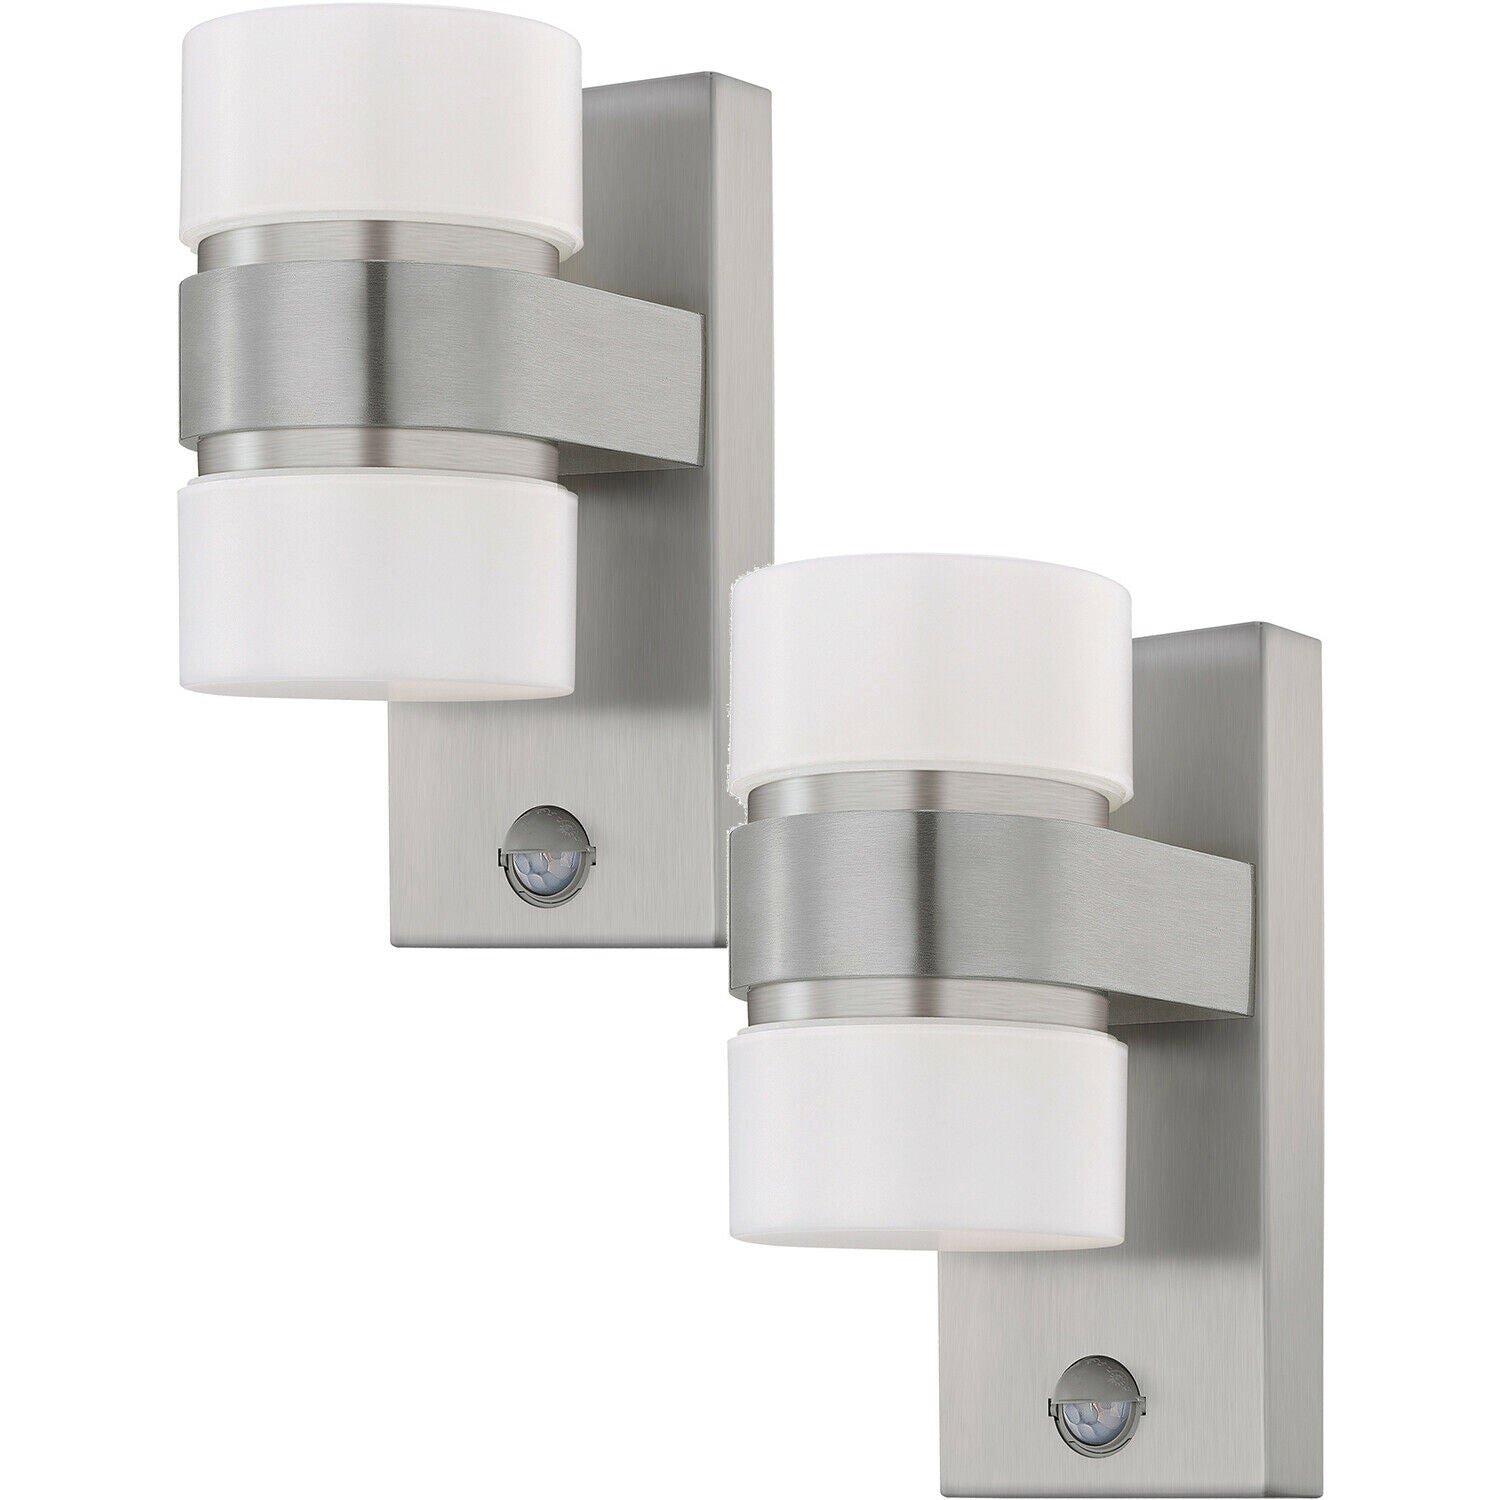 2 PACK IP44 Outdoor Wall Light & PIR Sensor Stainless Steel & Silver 6W LED